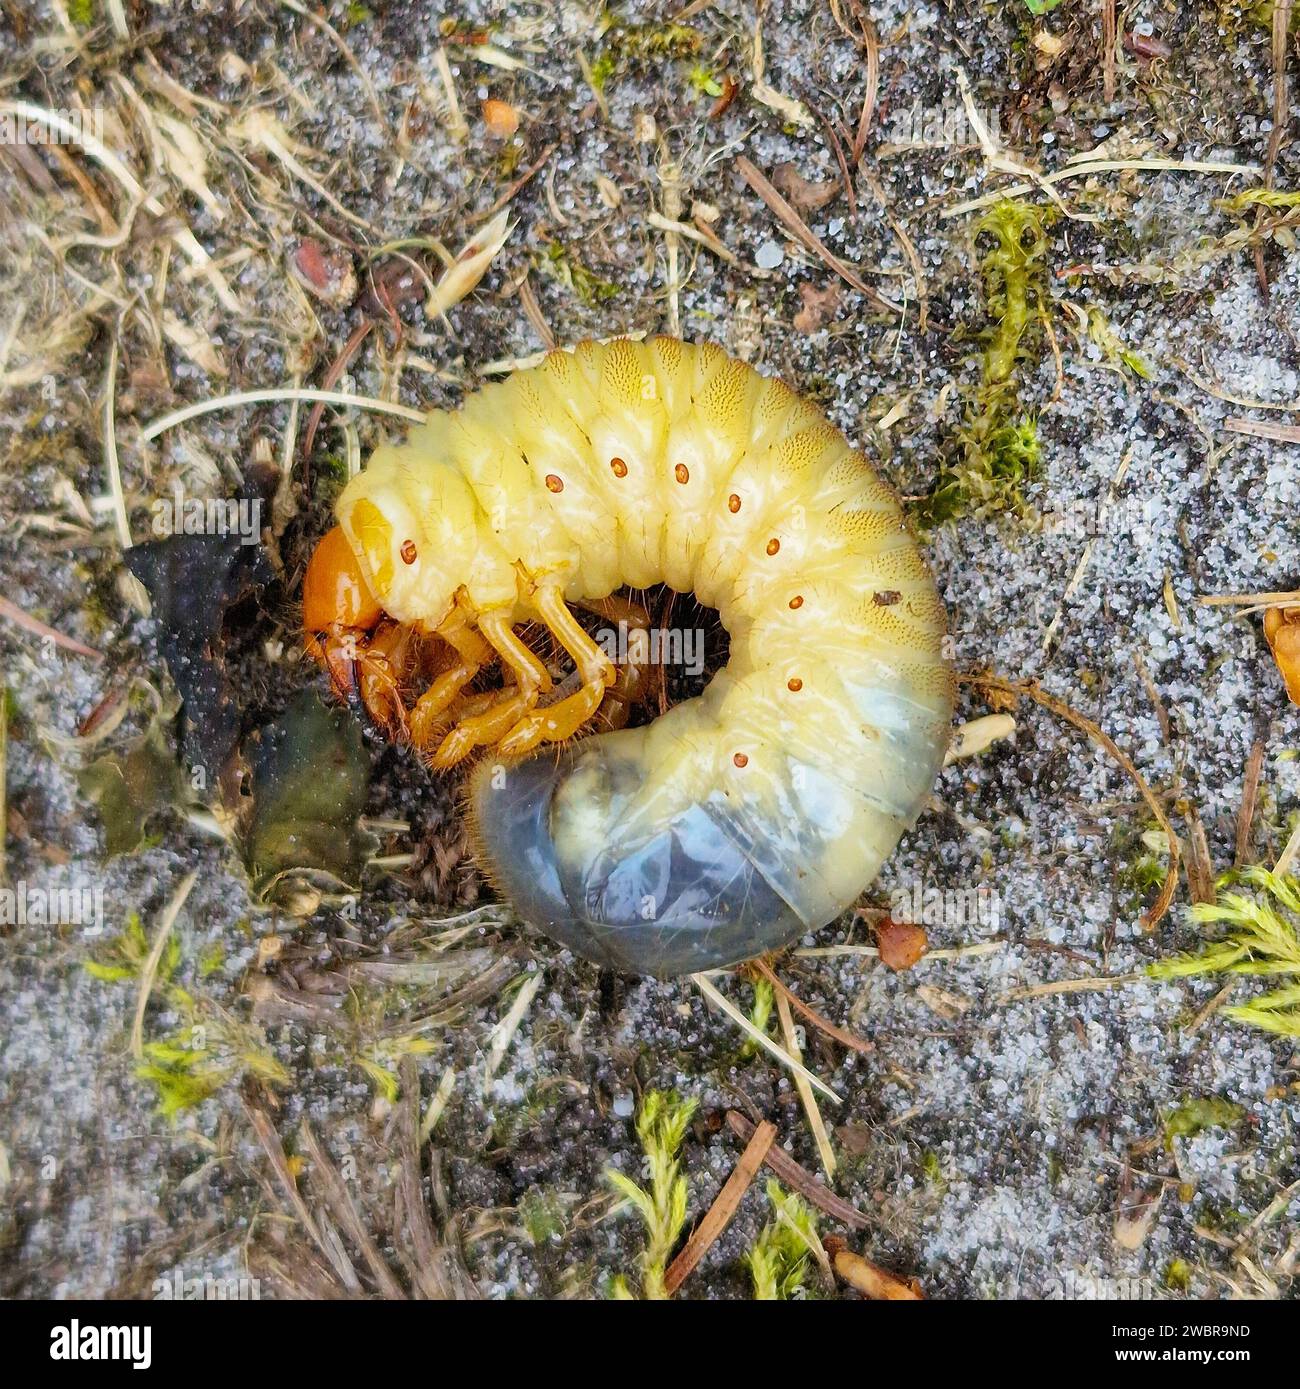 Larva of Common cockchafer (Melolontha melolontha) Stock Photo